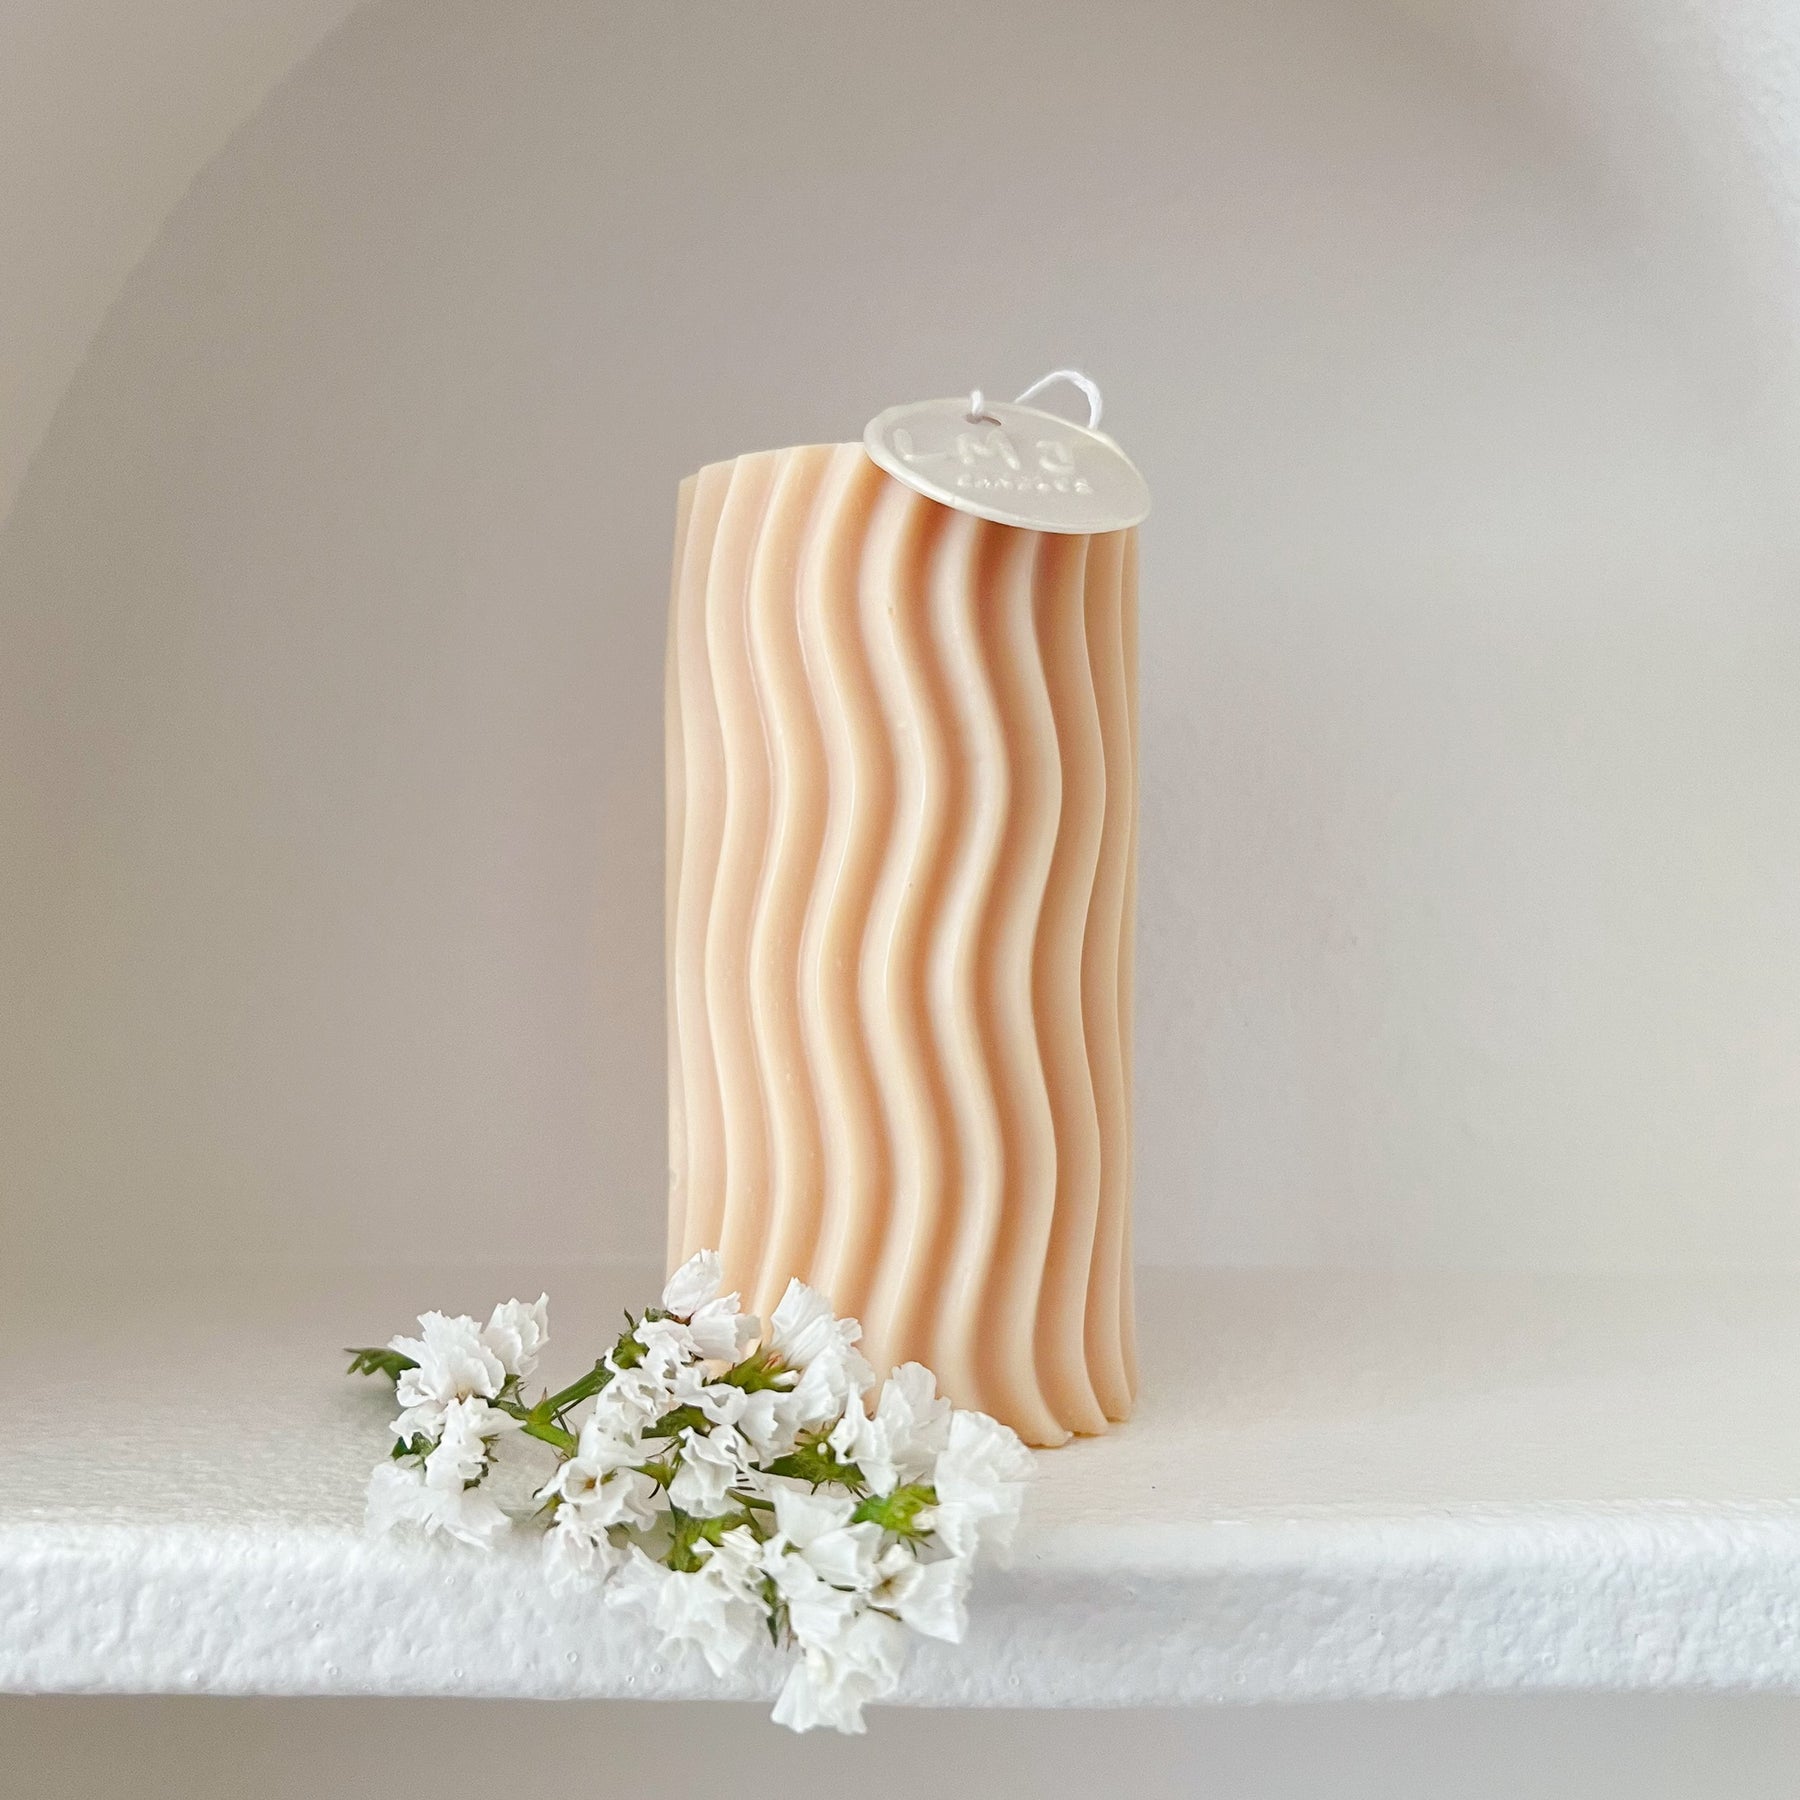 Minimalistic Wave Soy Pillar Candle - Australian Made | LMJ Candles